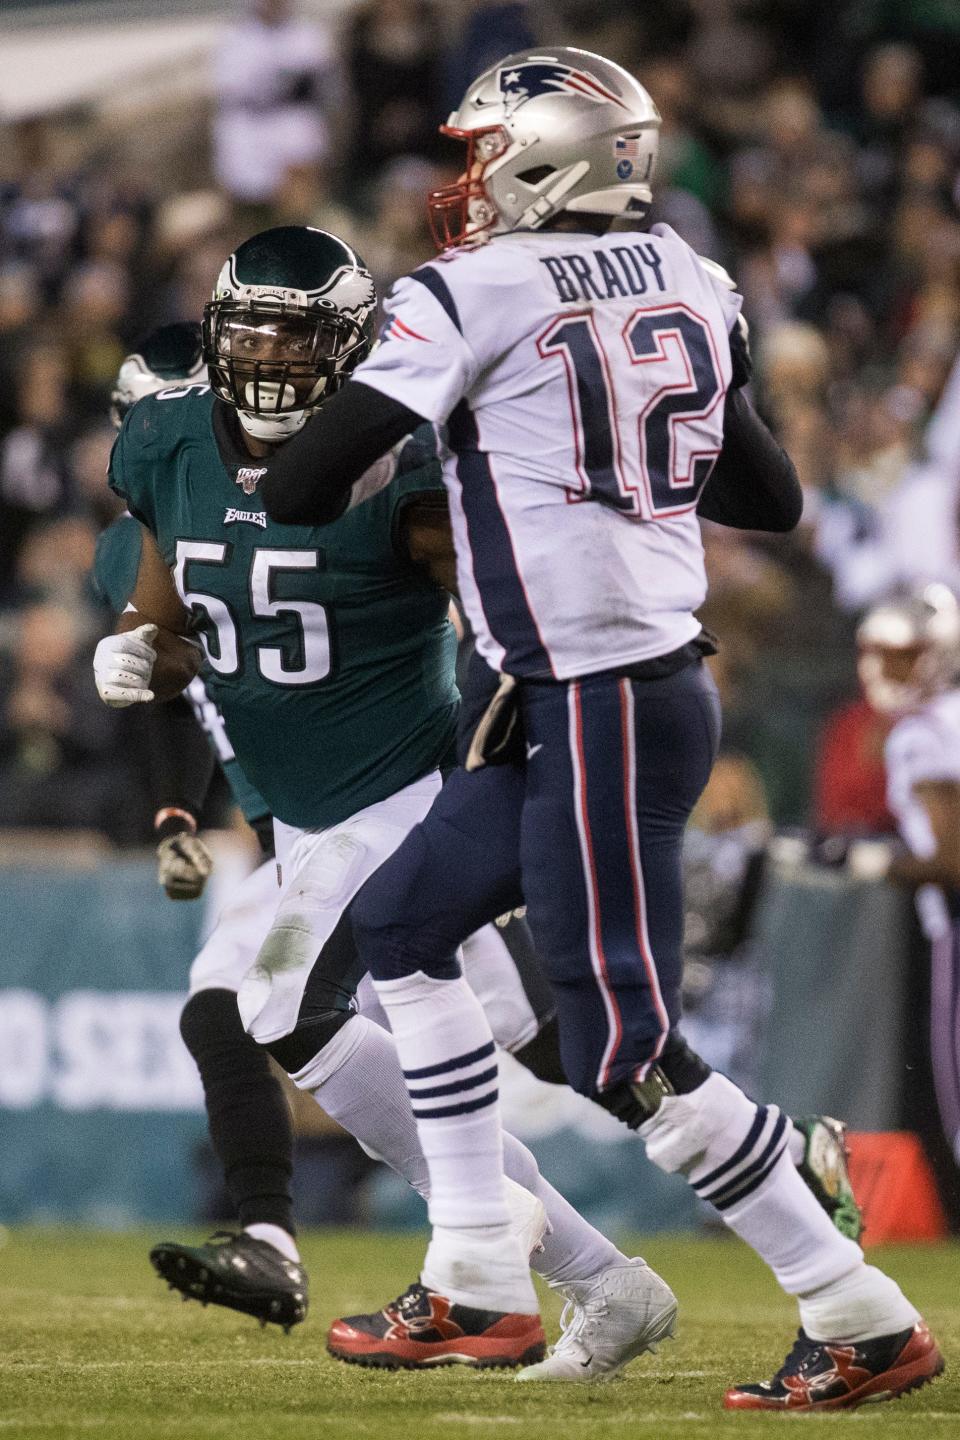 Eagles' Brandon Graham (55) eyes New England's Tom Brady (12) during a 2019 game between the two teams. Graham is most known for his strip-sack of Brady late in the Eagles 41-33 win over New England in the Super Bowl on Feb. 4, 2018.